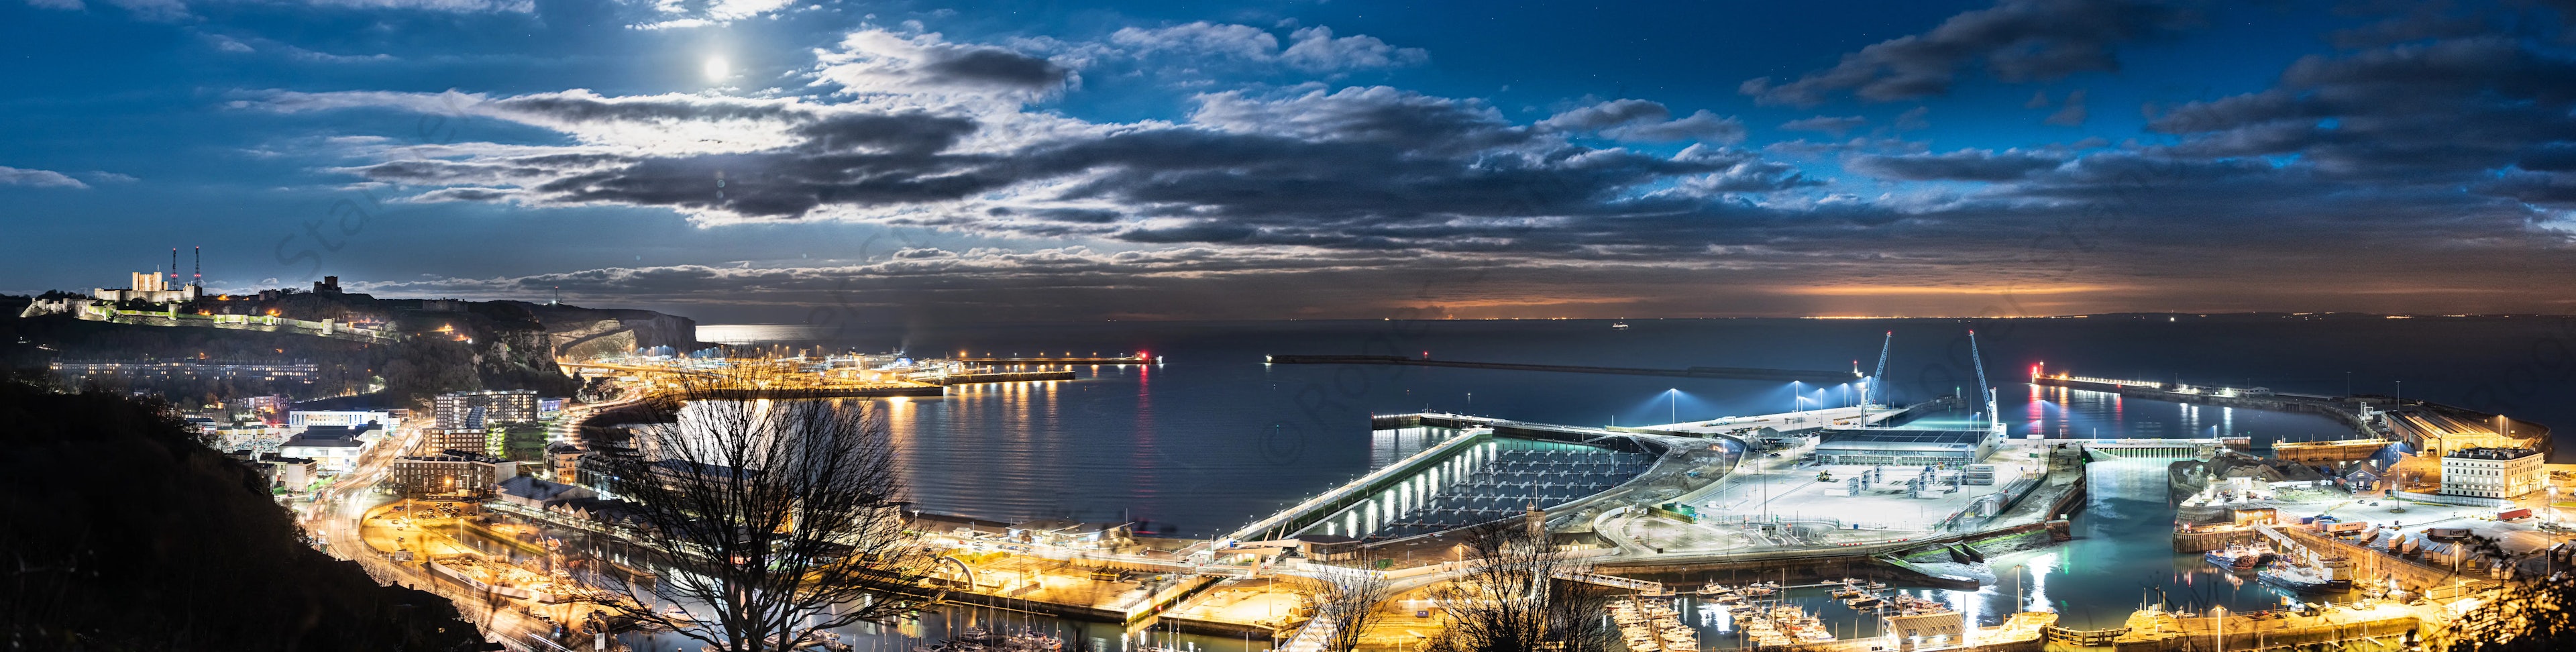 Dover Moonrise pano. 4:1